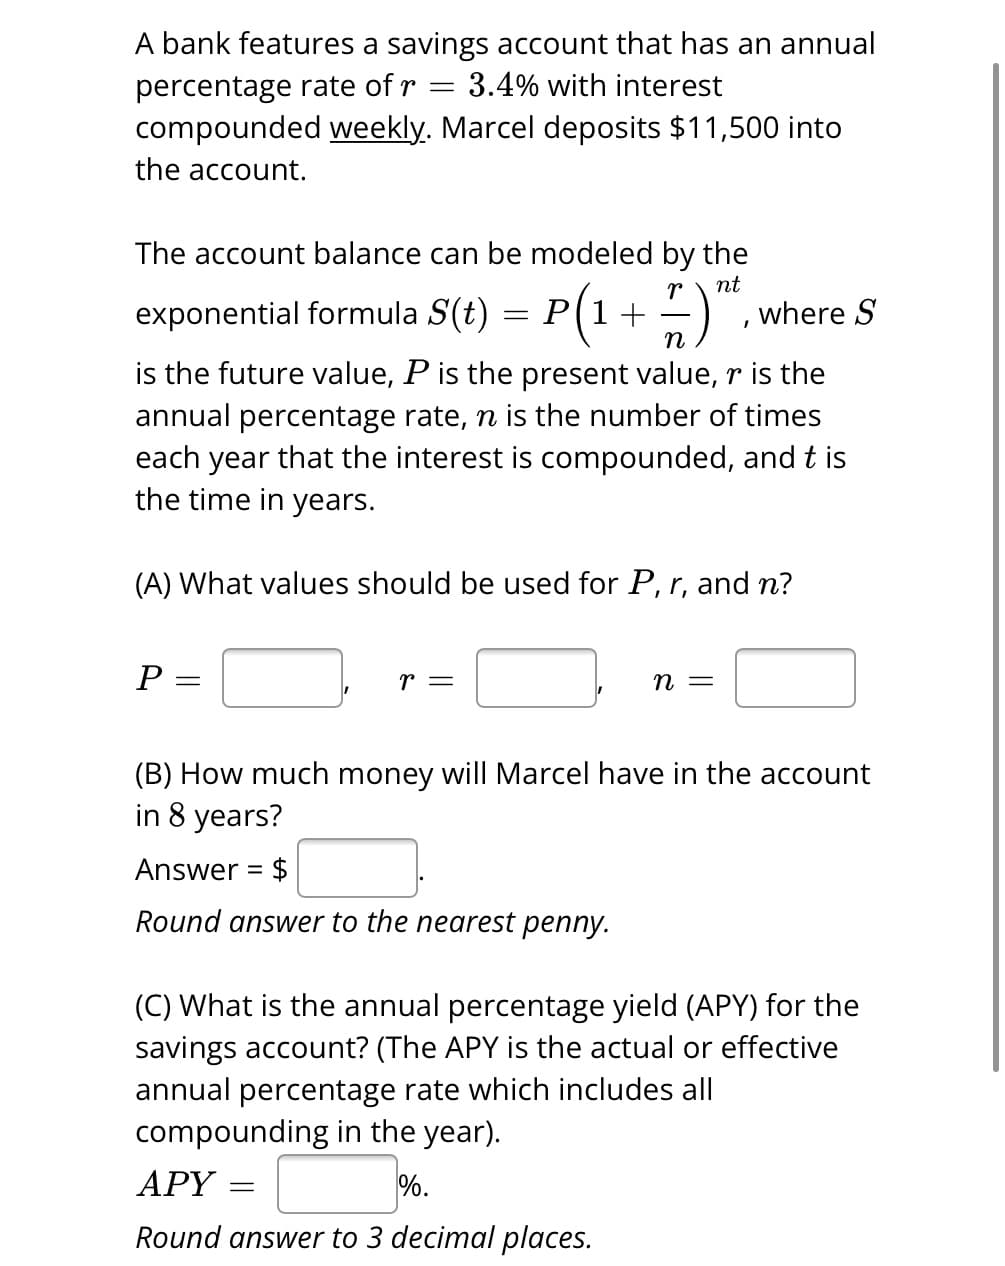 =
A bank features a savings account that has an annual
percentage rate of r 3.4% with interest
compounded weekly. Marcel deposits $11,500 into
the account.
The account balance can be modeled by the
nt
exponential formula S(t) = P(1 + 7 ) "²,
n
is the future value, P is the present value, r is the
annual percentage rate, n is the number of times
each year that the interest is compounded, and t is
the time in years.
(A) What values should be used for P, r, and n?
P:
=
r =
n =
where S
(B) How much money will Marcel have in the account
in 8 years?
Answer = $
Round answer to the nearest penny.
(C) What is the annual percentage yield (APY) for the
savings account? (The APY is the actual or effective
annual percentage rate which includes all
compounding in the year).
APY =
%.
Round answer to 3 decimal places.